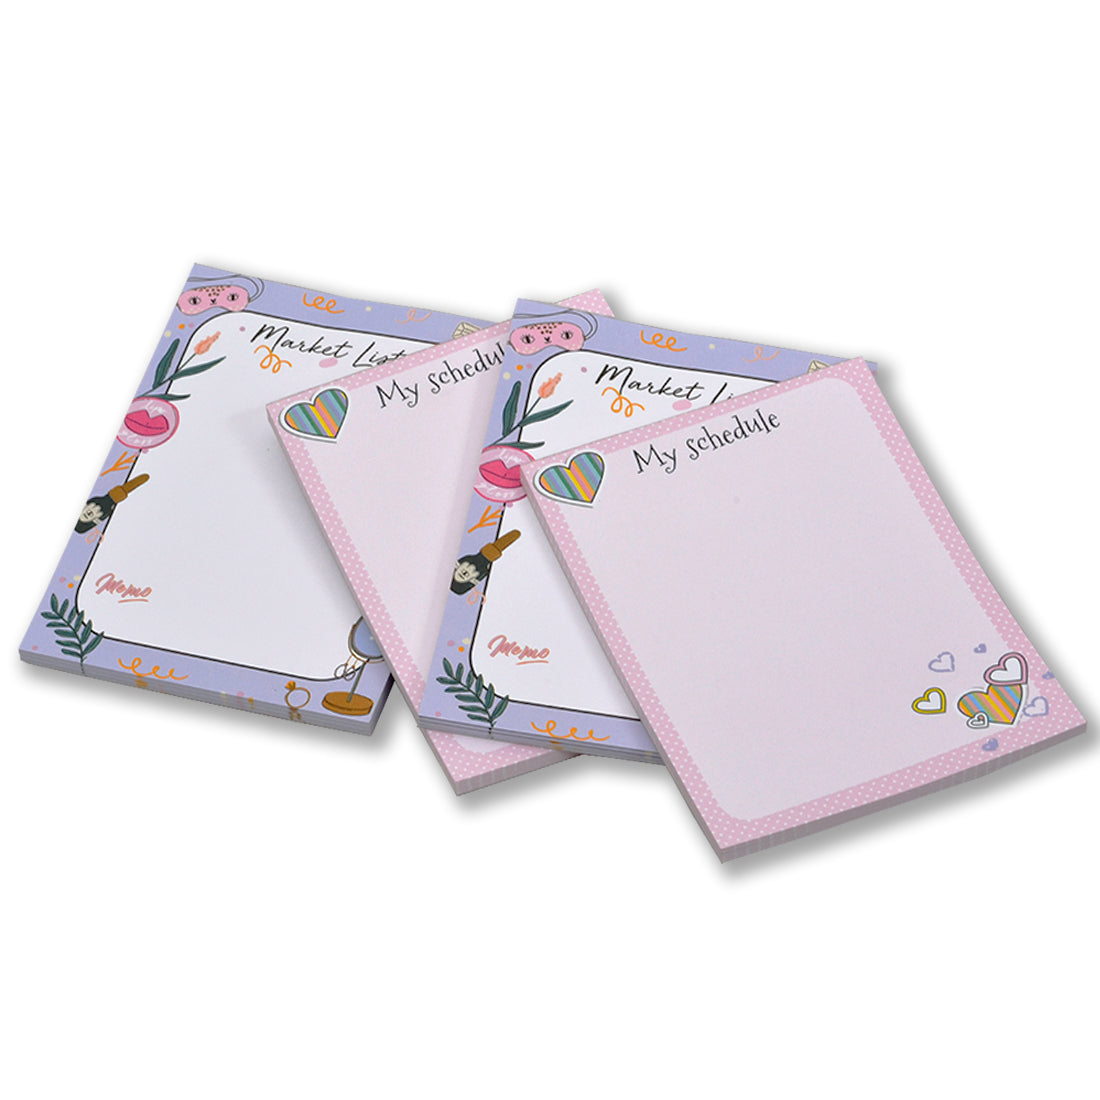 Collections to Do List Notepad Notes Tear-Off Pad, Memo Pad for Shopping Lists, Schedule, Appointments Set of 4 Writing Pads